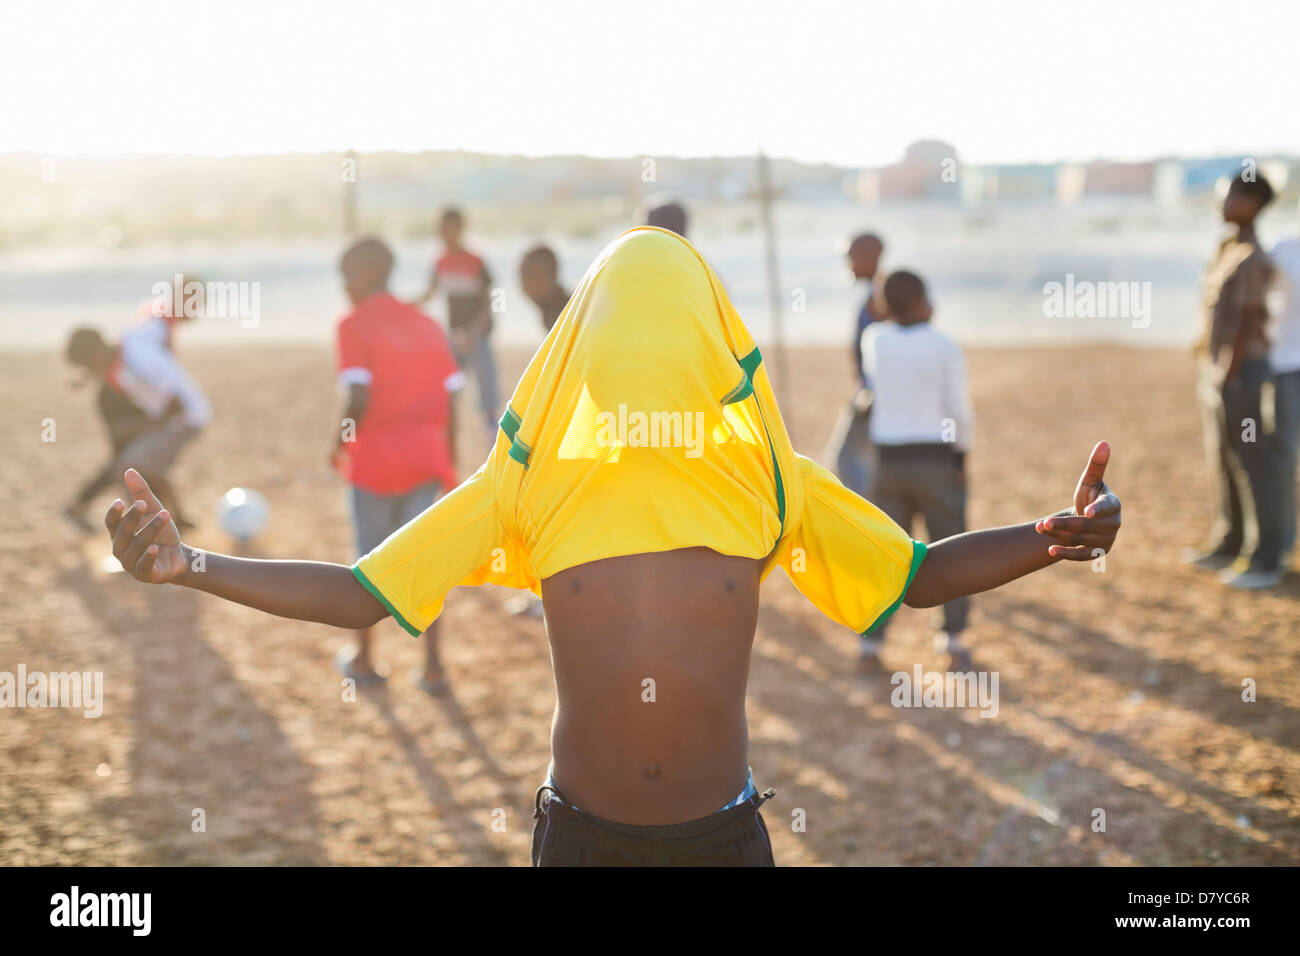 Boy celebrating with soccer jersey on his head in dirt field Stock Photo